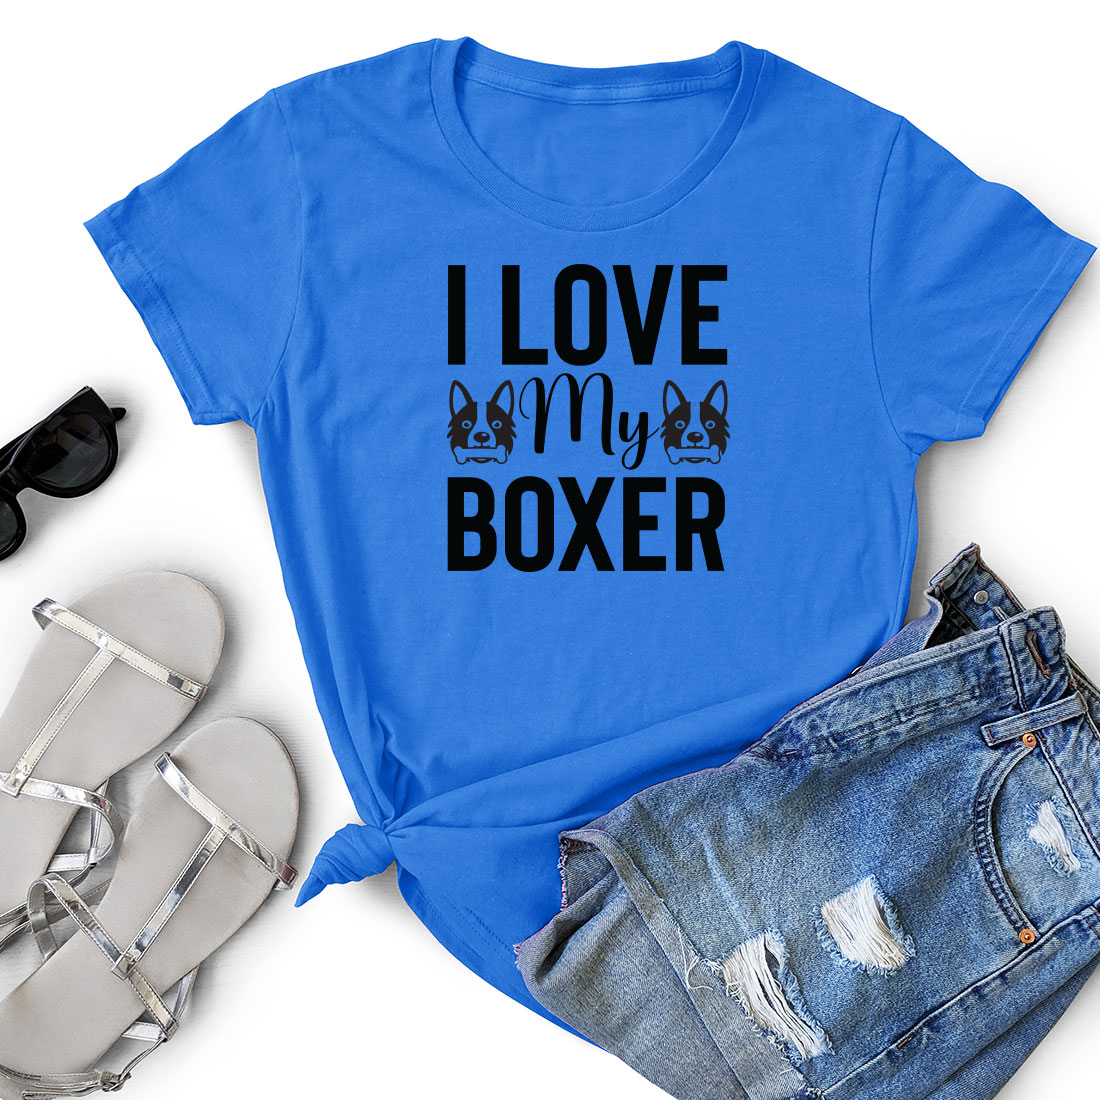 Blue shirt that says i love my boxer on it.